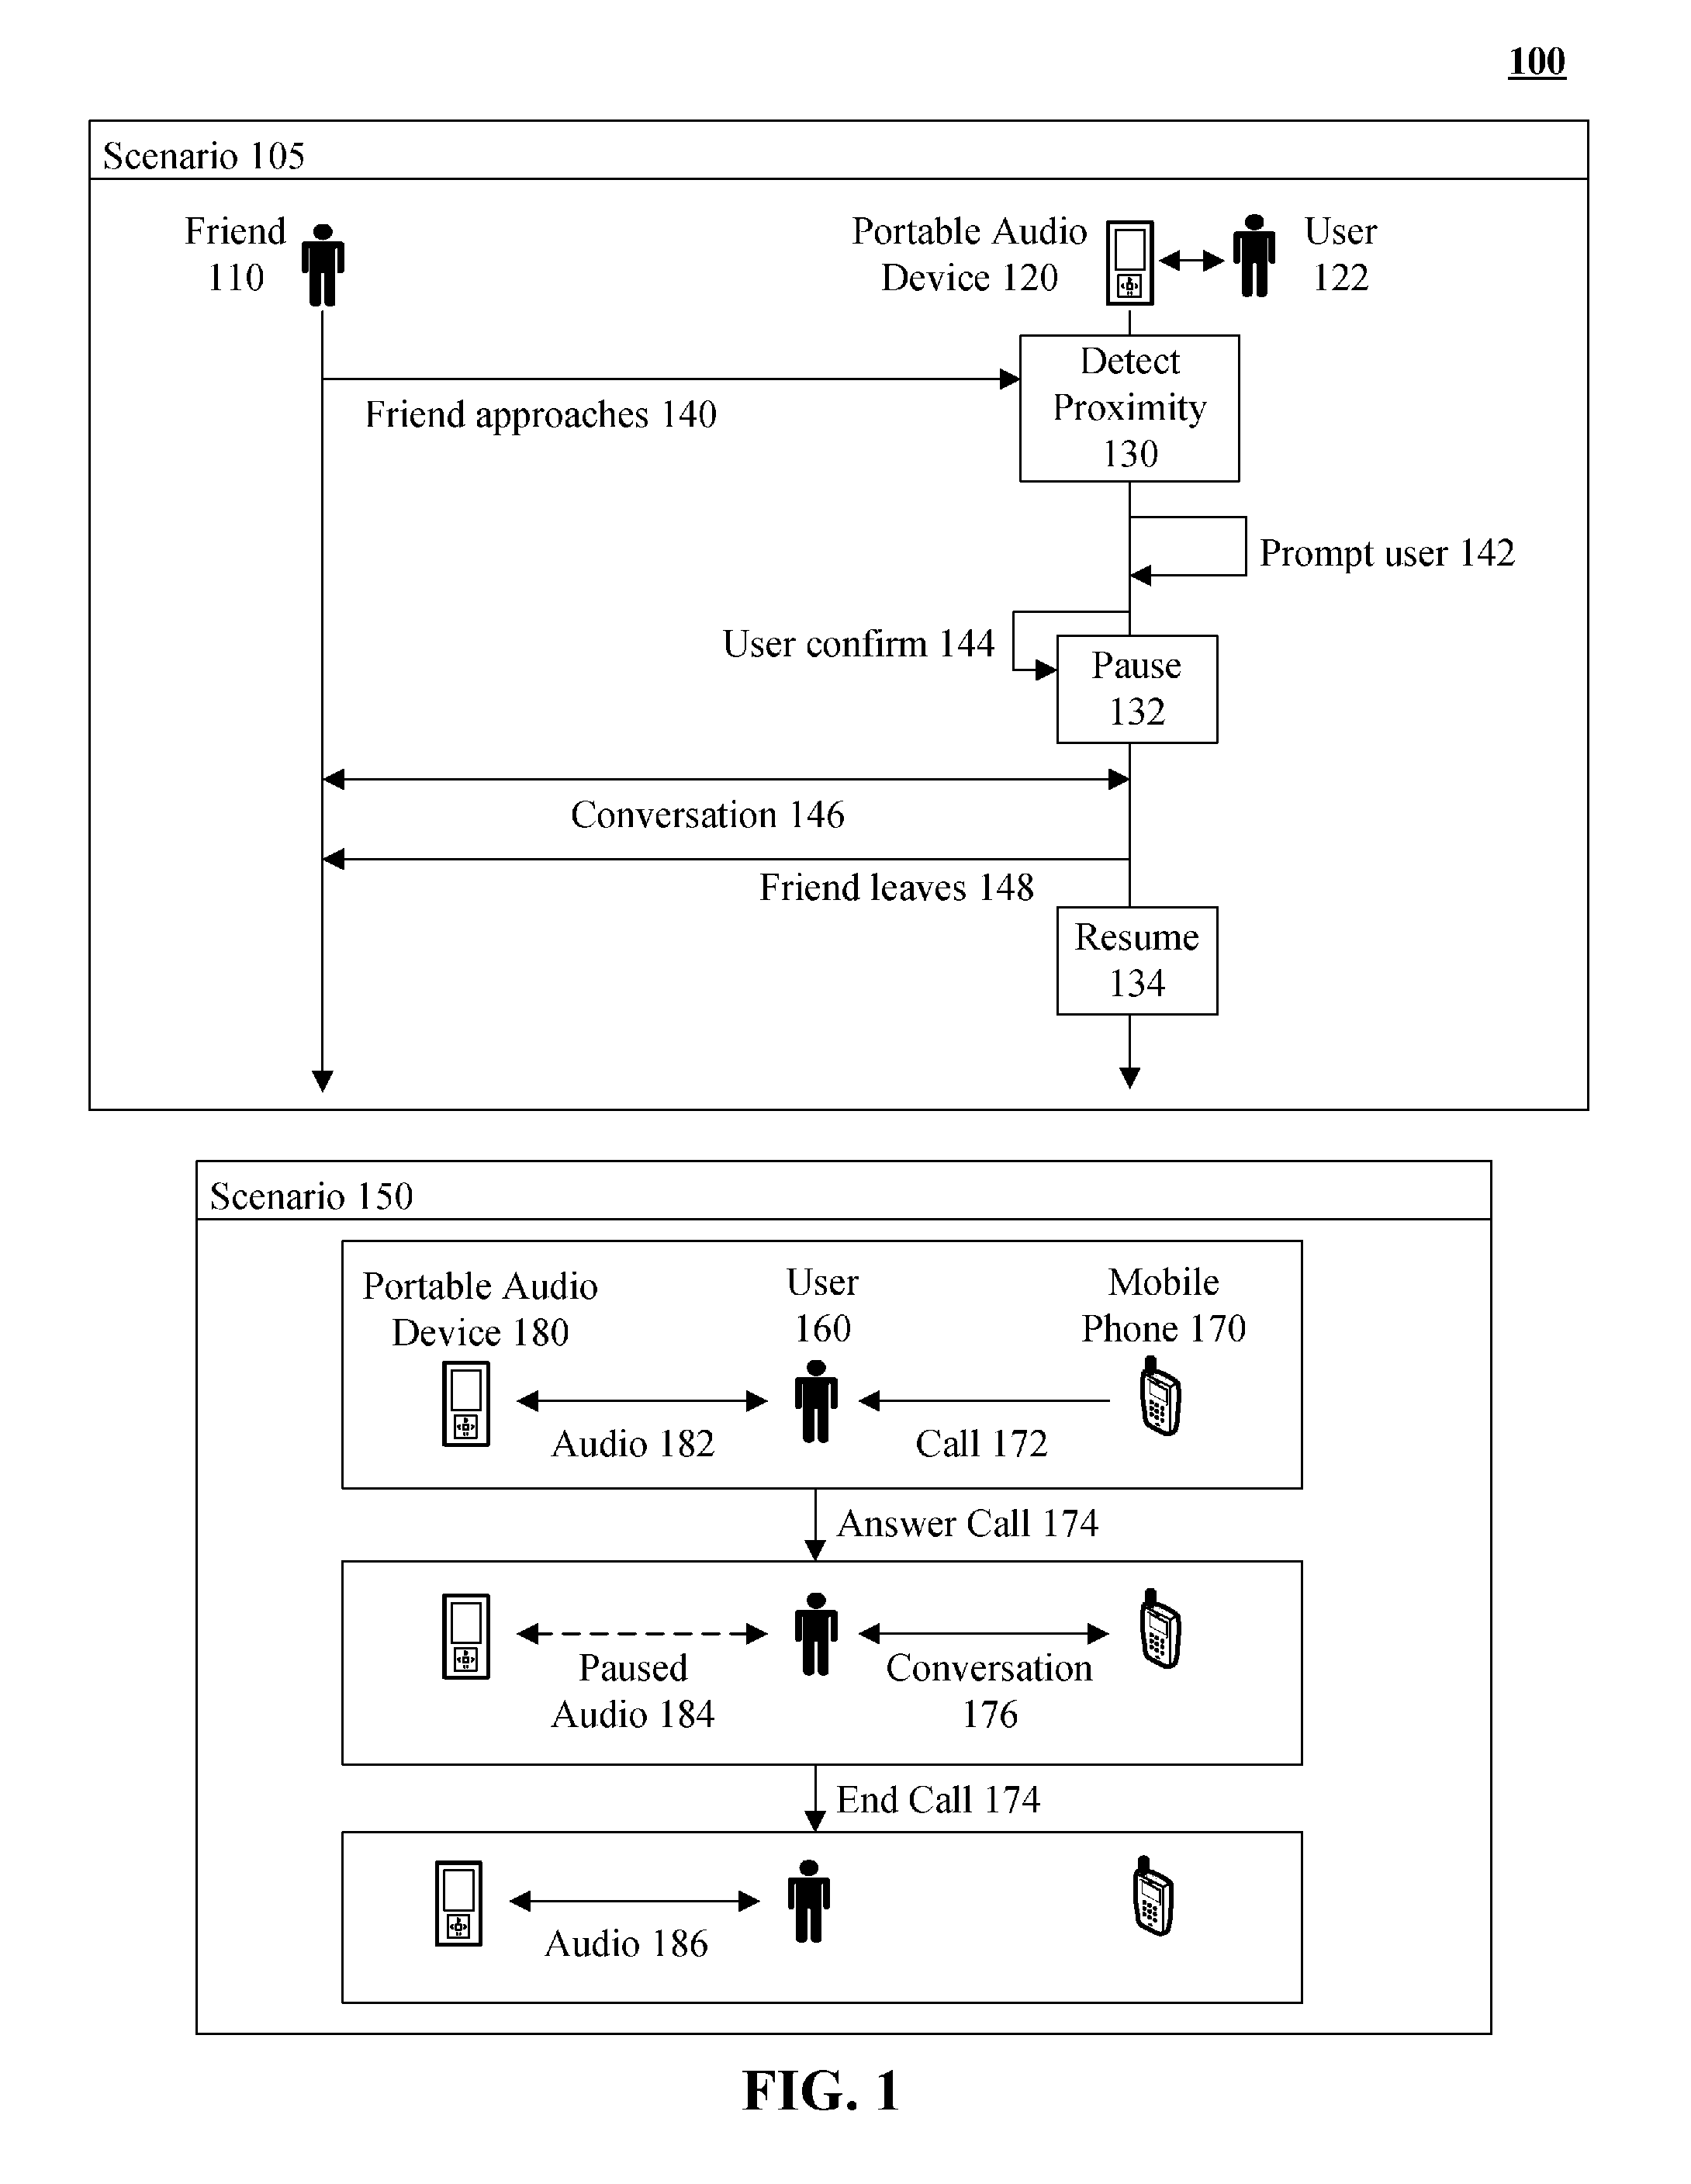 Automated playback control for audio devices using environmental cues as indicators for automatically pausing audio playback